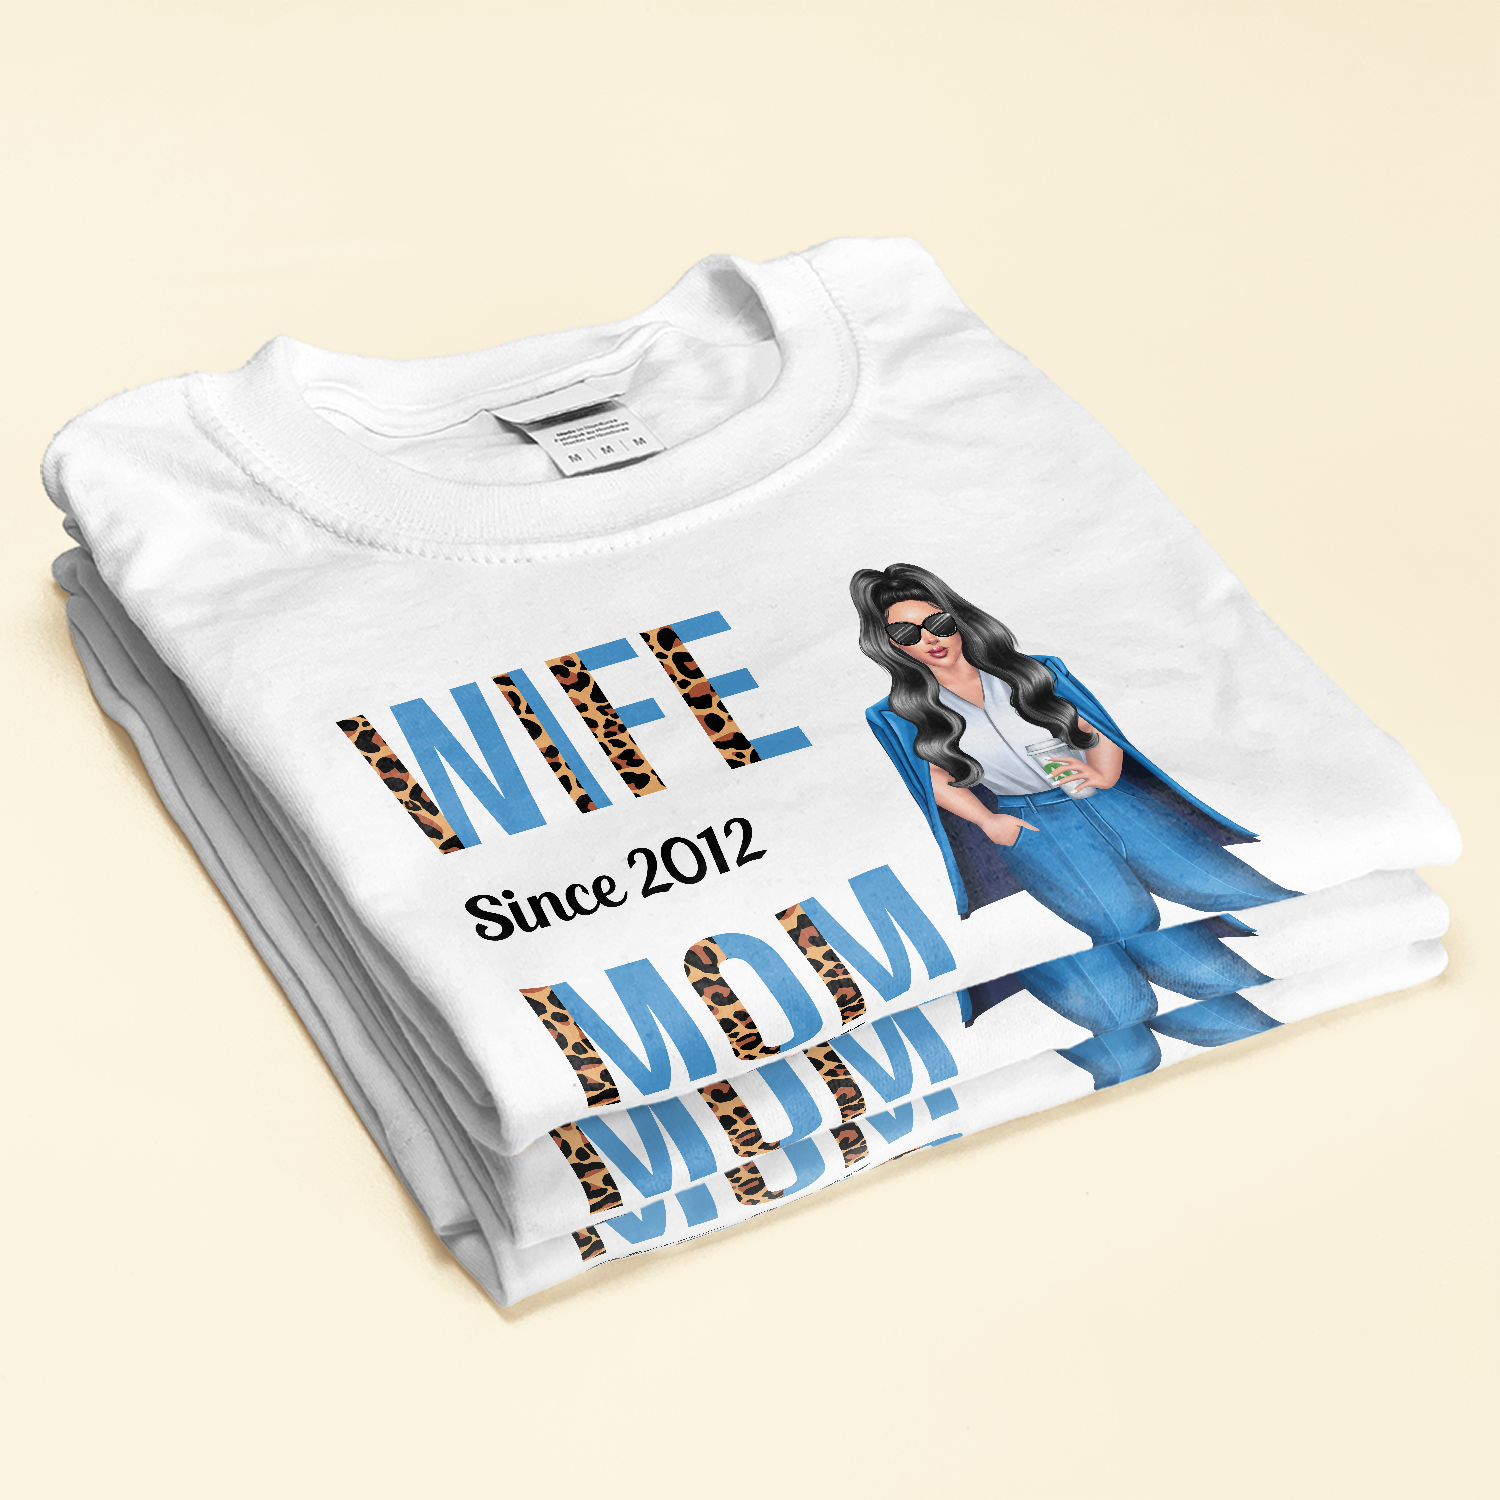 Wife, Mom, Boss - Personalized Shirt - Anniversary Gift Valentine's Day Gift For Wife, Boss Lady